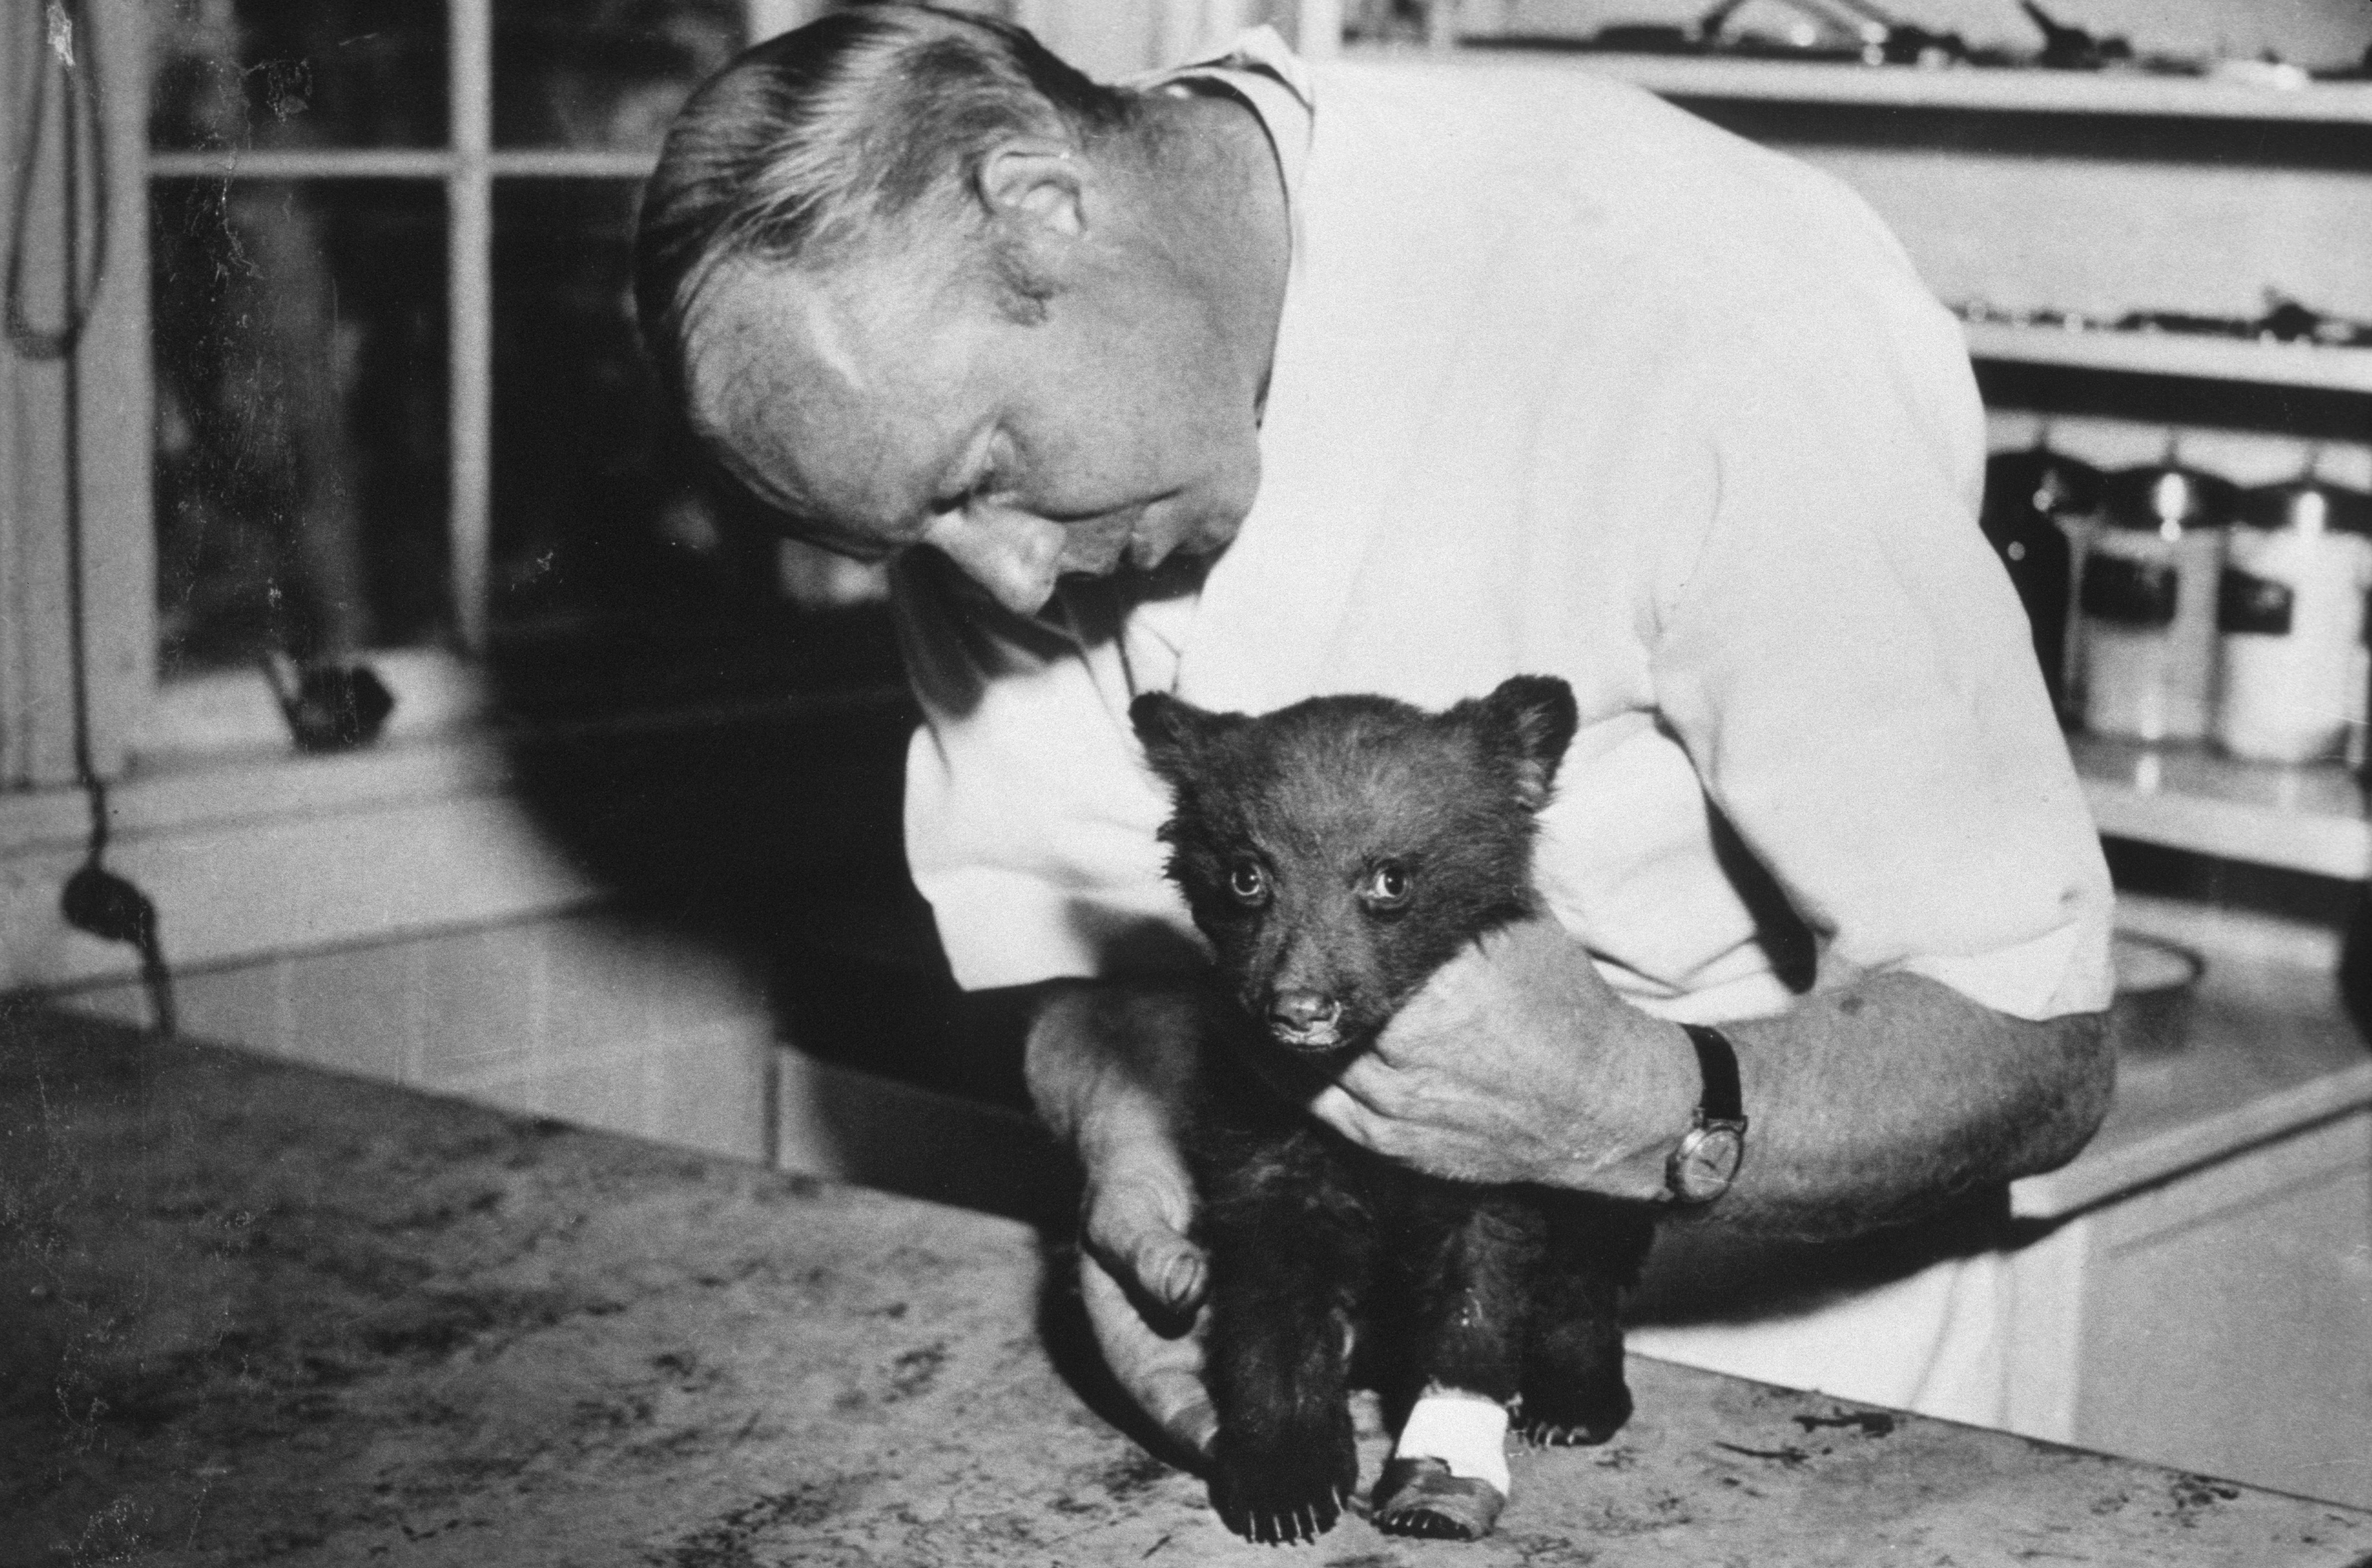 A veterinarian attends to a bear cub, nicknamed Smokey, that was injured in a wildfire. The cub has a bandage around one of its front paws